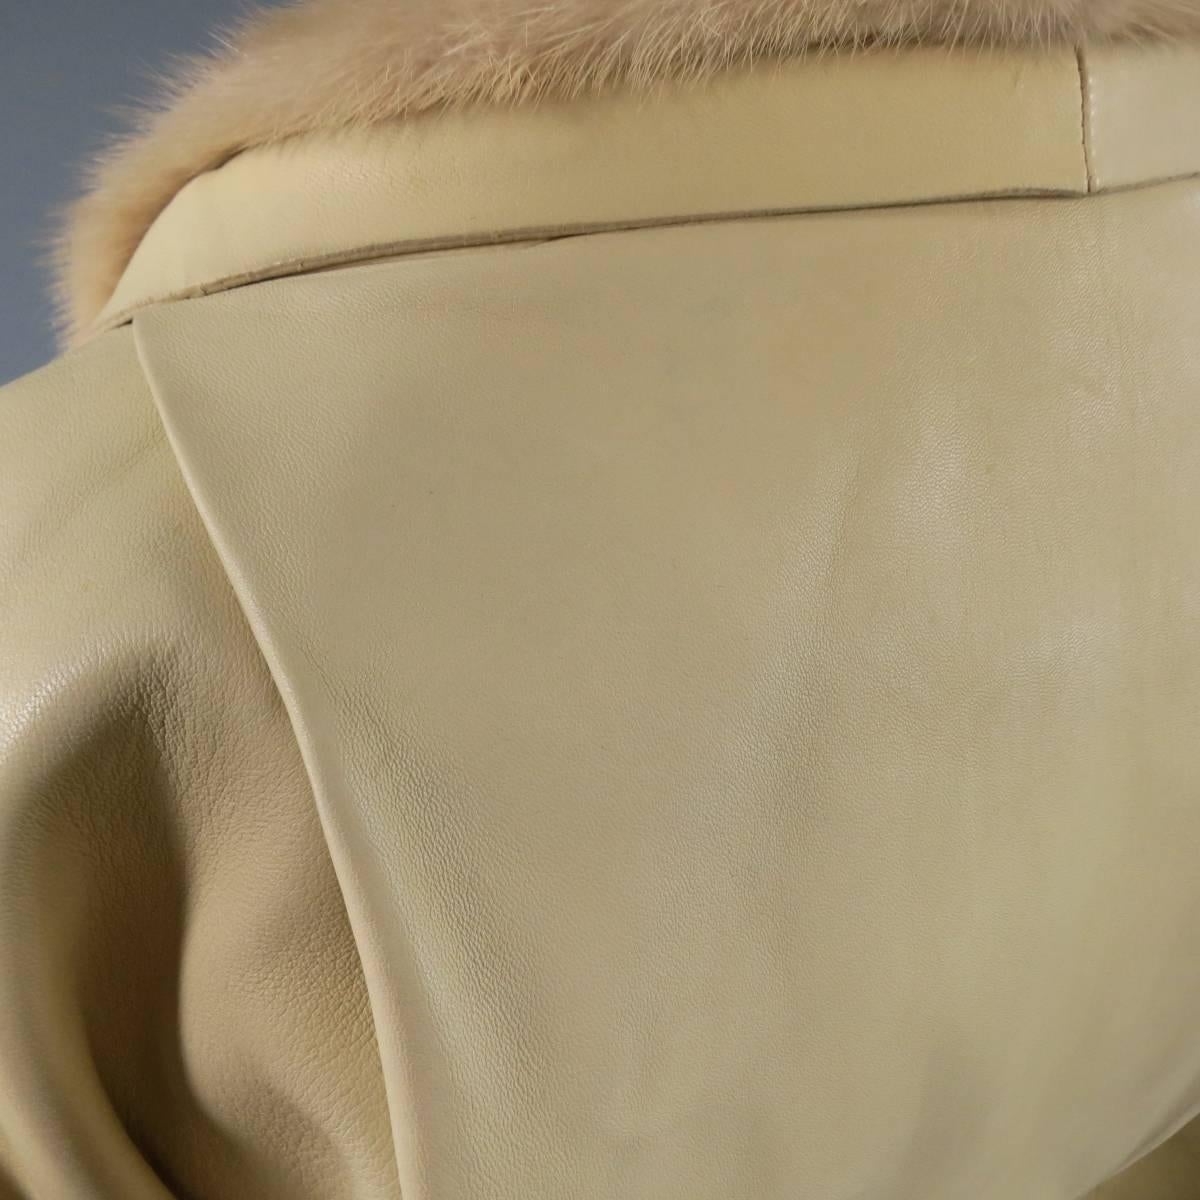 Women's MARC JACOBS Size 6 Beige Leather Mink Collar Cropped Jacket